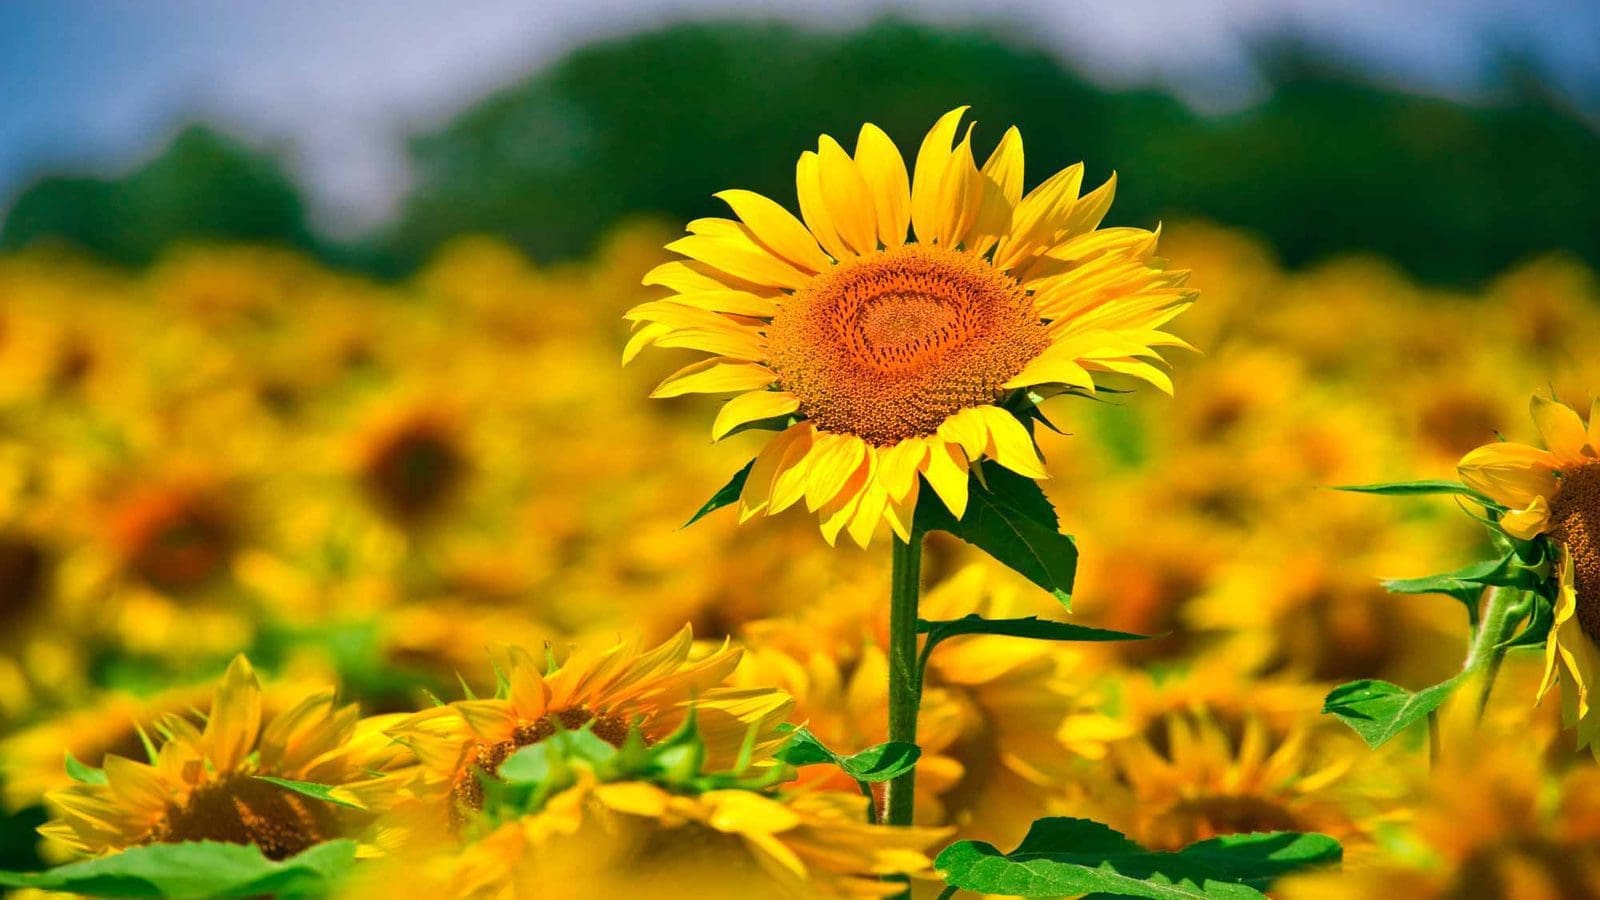 Inadequate sunflower seed imports could hamper Russian production in 2023